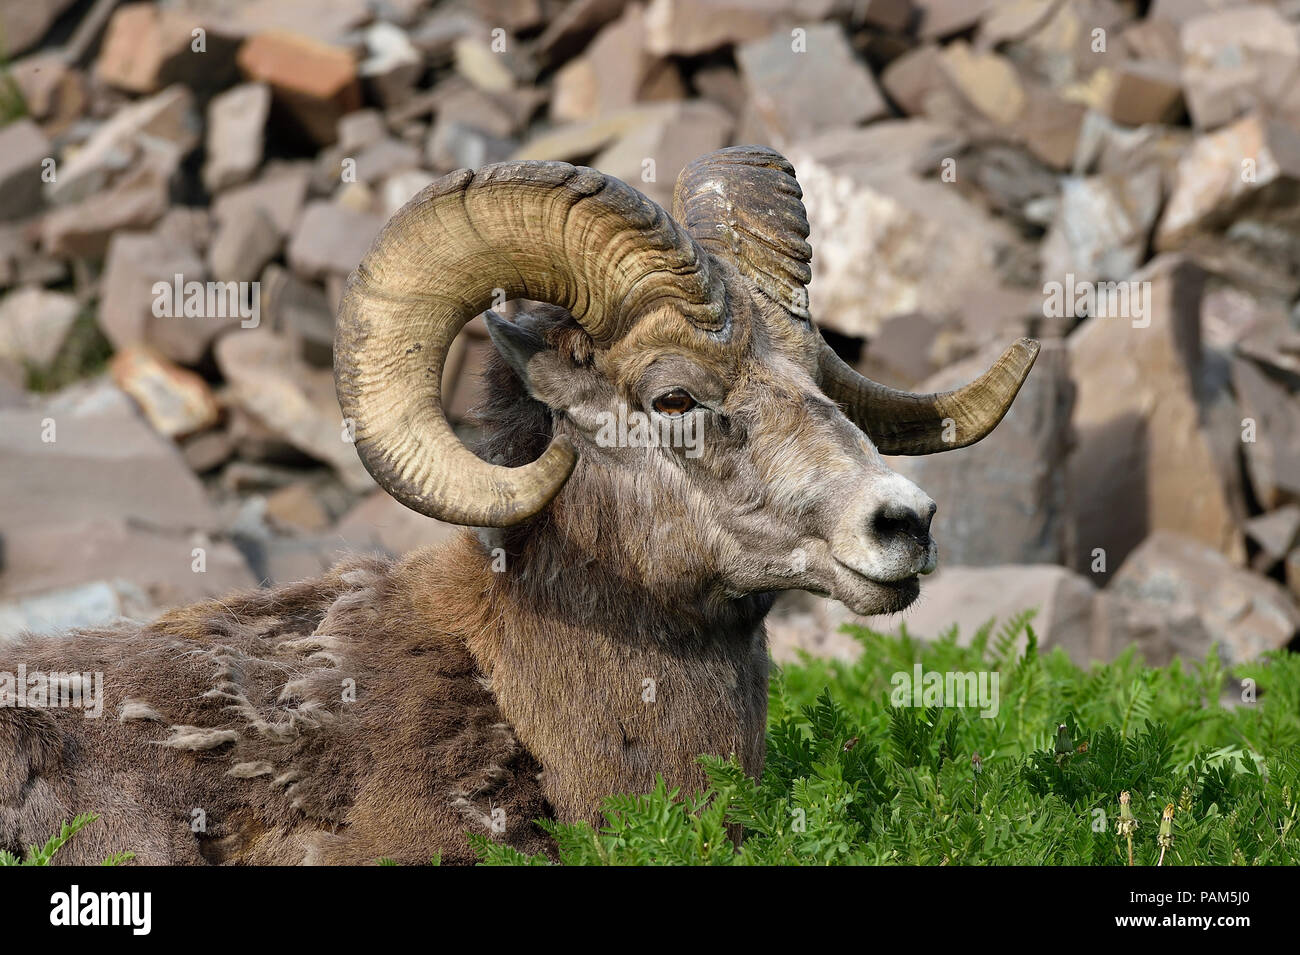 A portrait image of a Rocky Mountain Bighorn Sheep laying in the lush vegetation at the edge of a rocky ridge near Cadomin Alberta Canada. Stock Photo